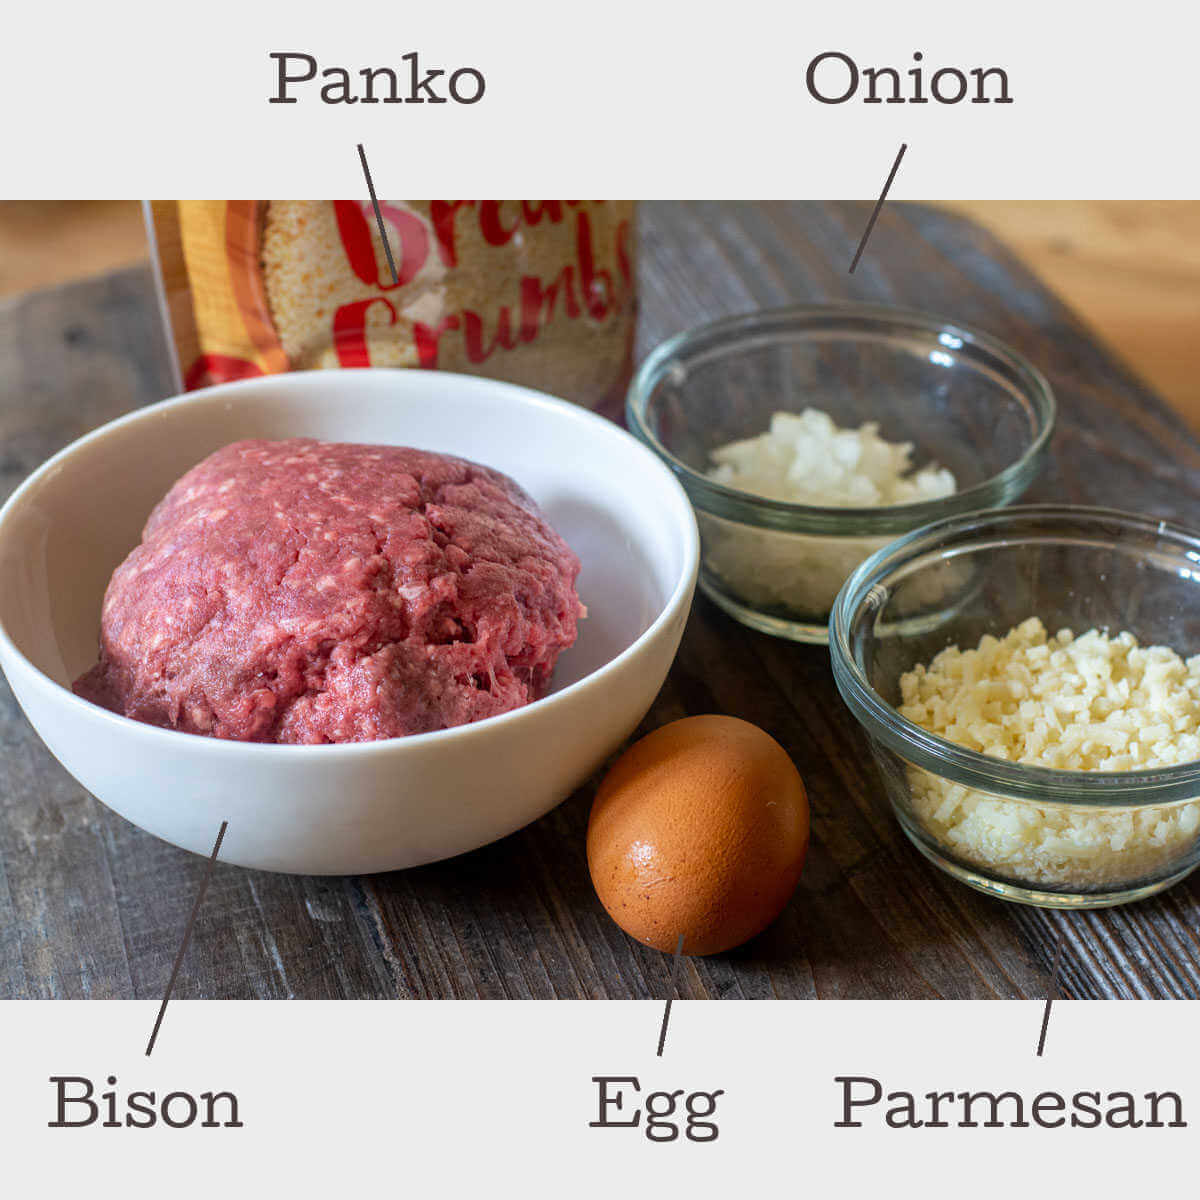 ingredients with labels for making the meatballs.